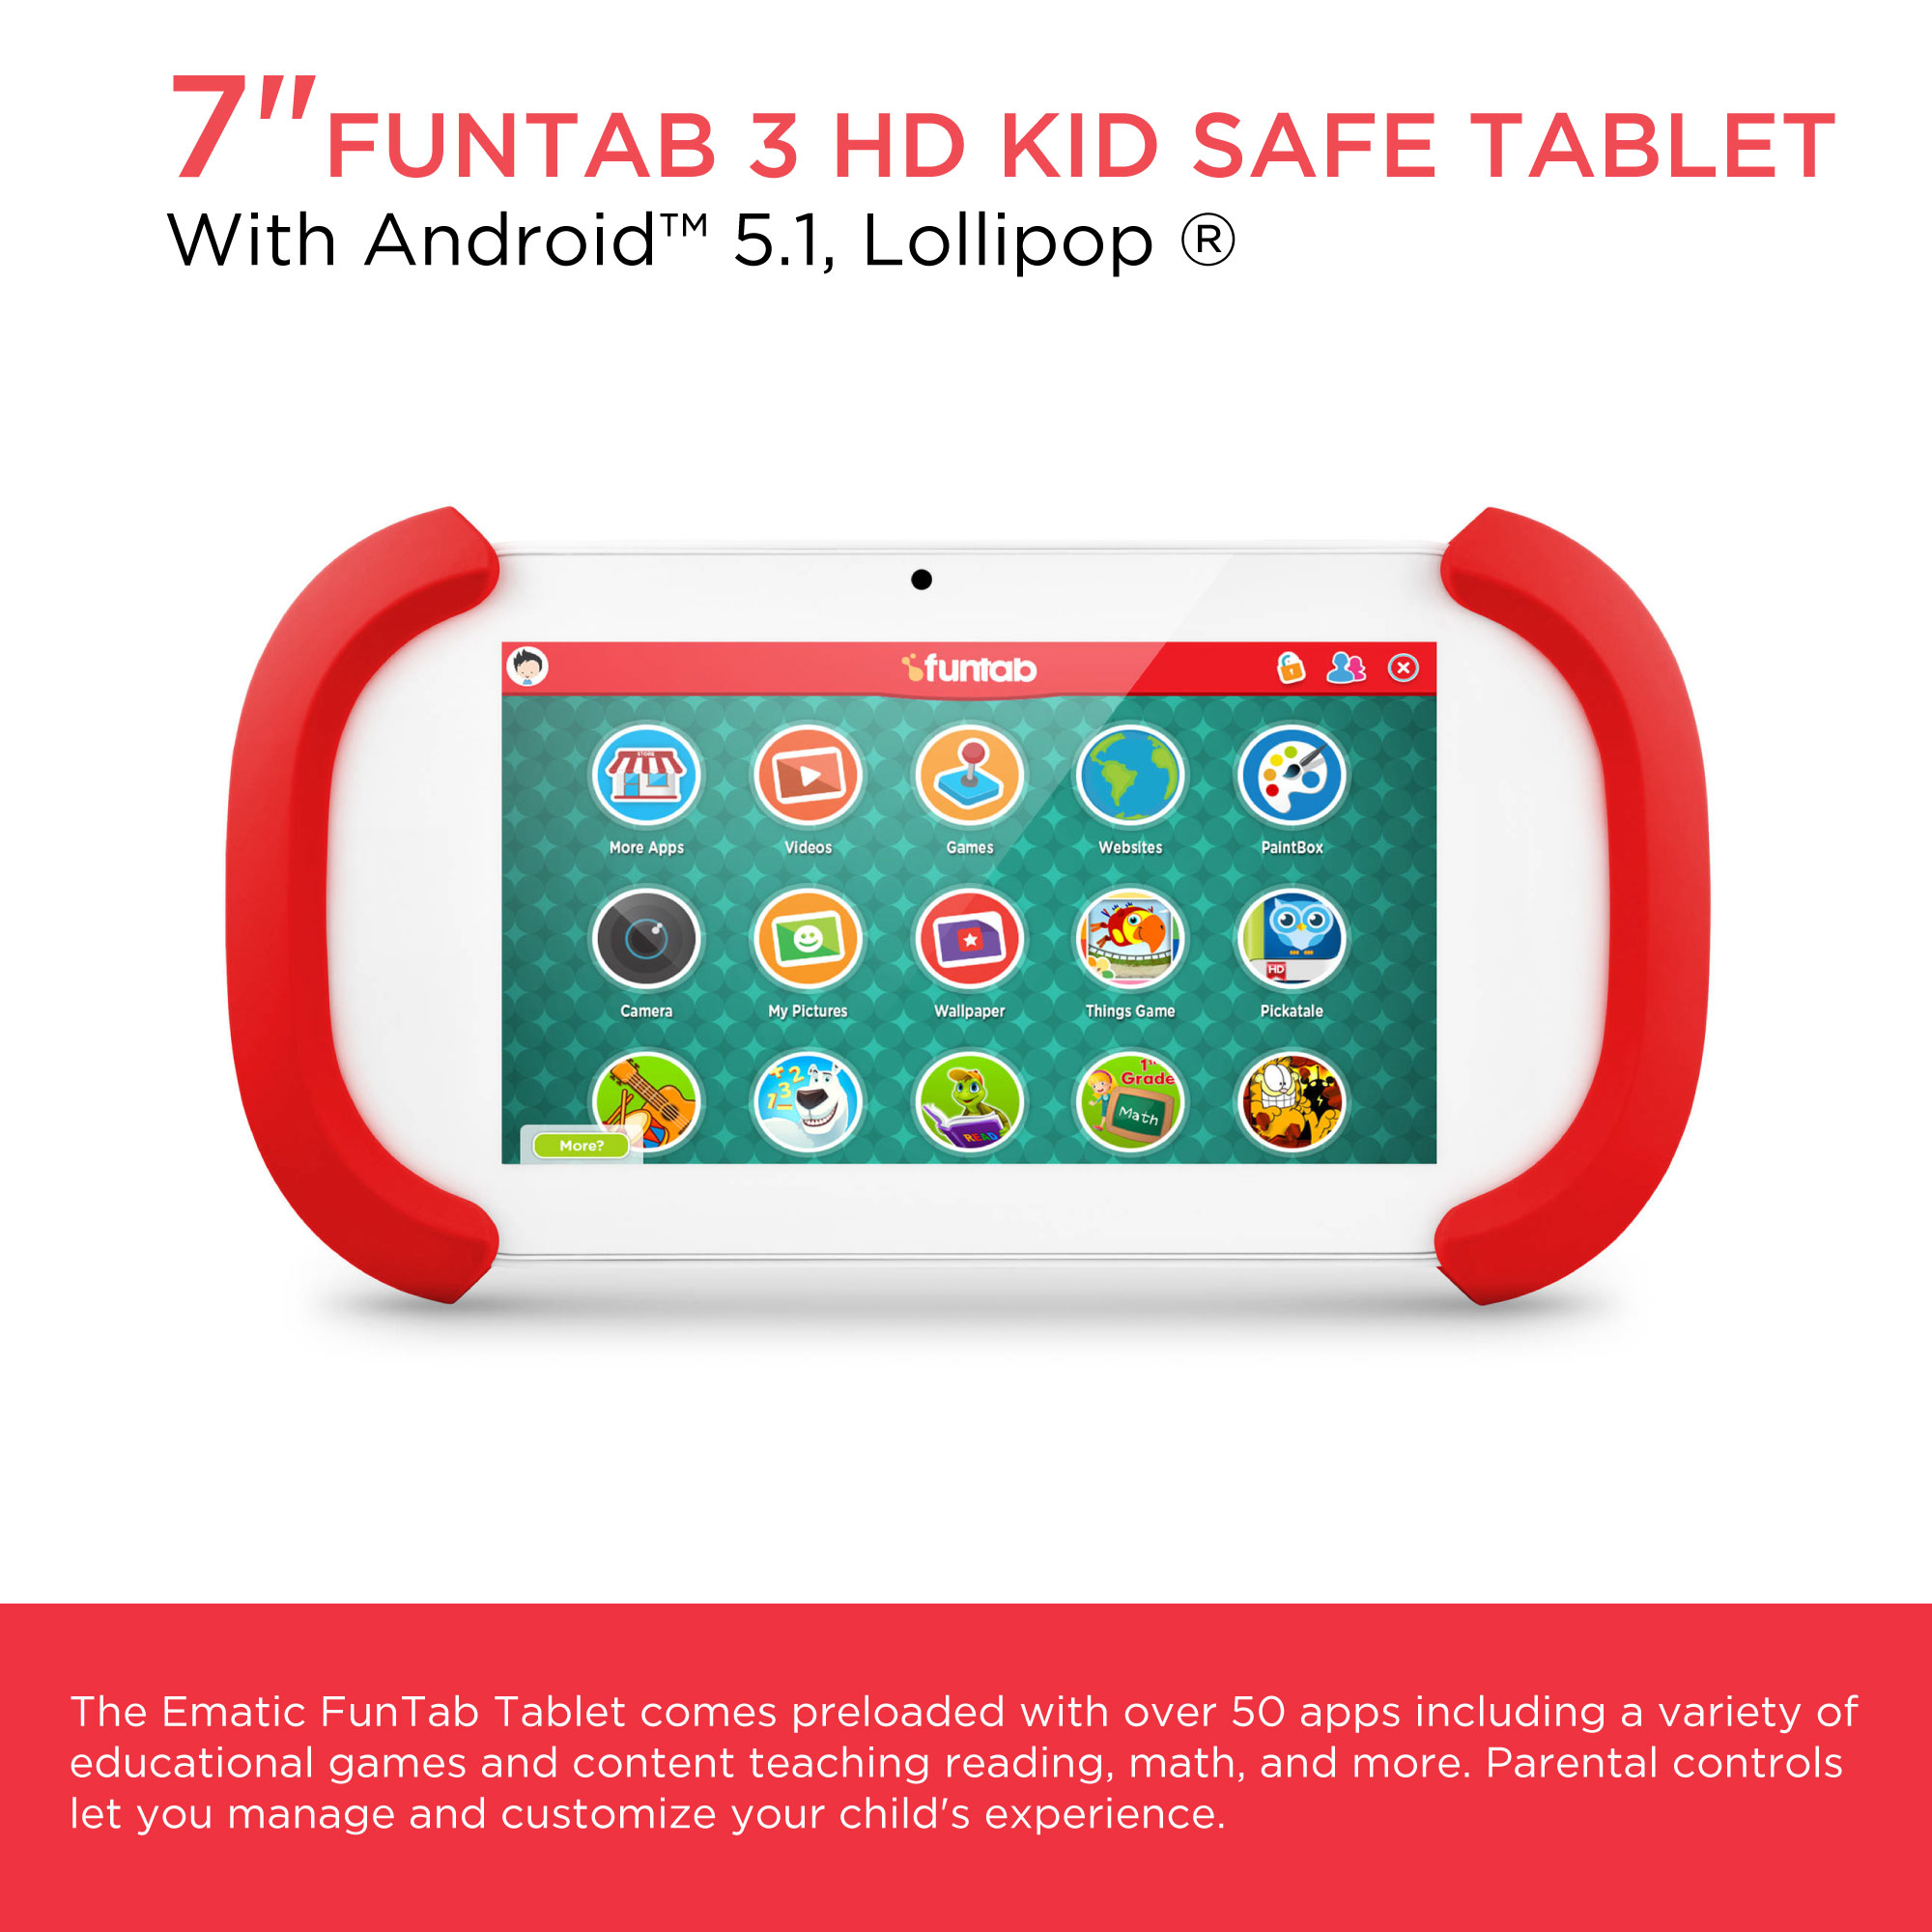 7" FunTab HD Kid-Safe Tablet with Android 5.1 (Lollipop) - image 2 of 6